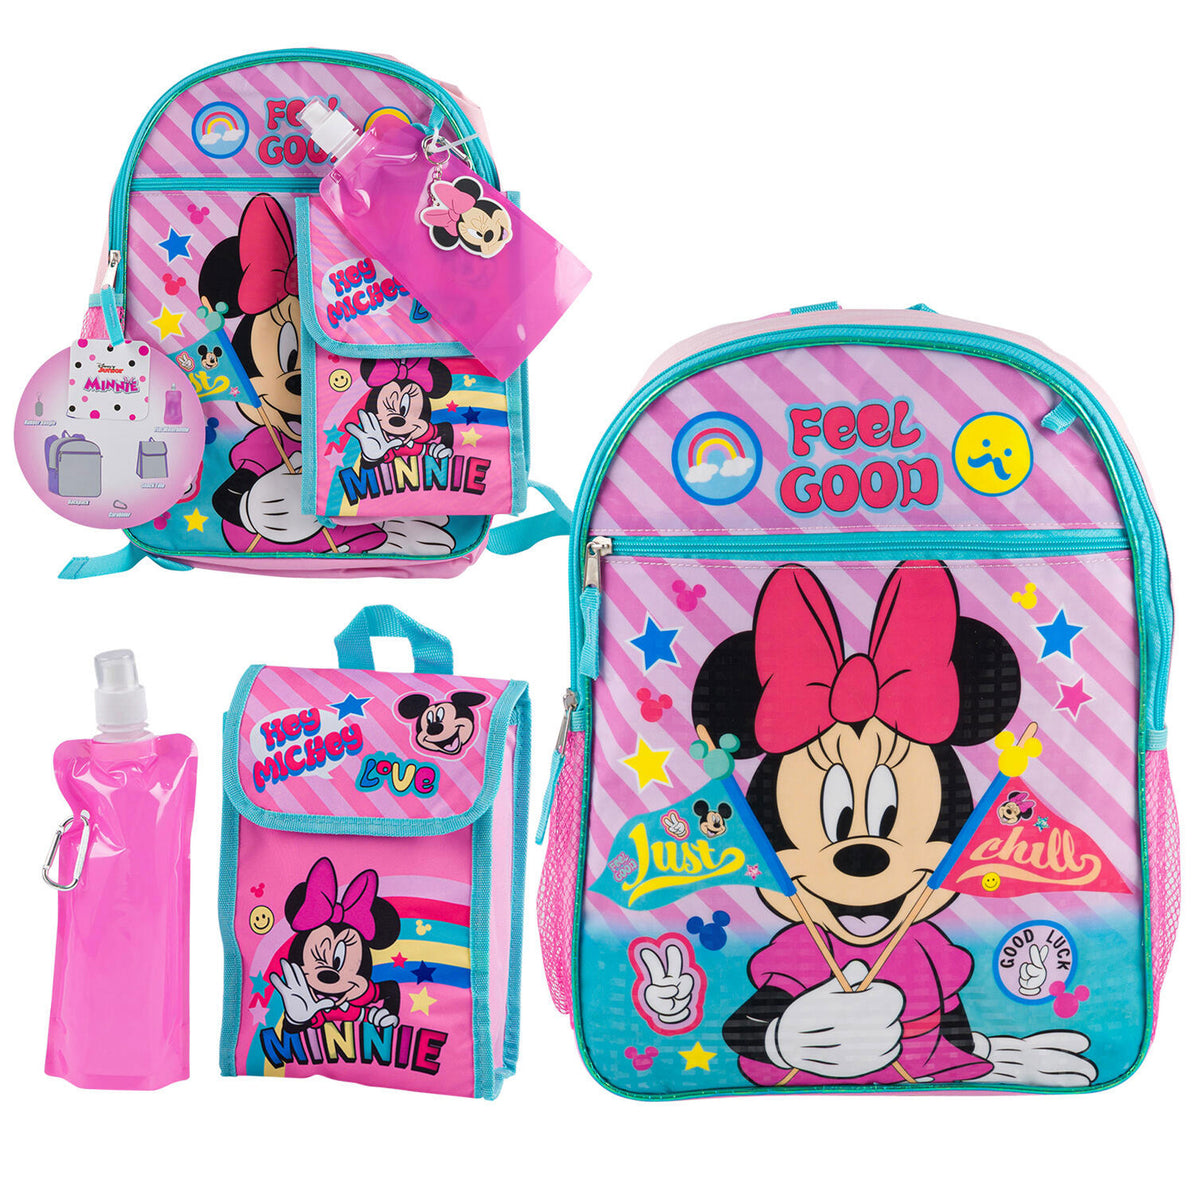 Disney Minnie Mouse 16 Backpack 4pc Set with Lunch Kit, Key Chain & carabiner.